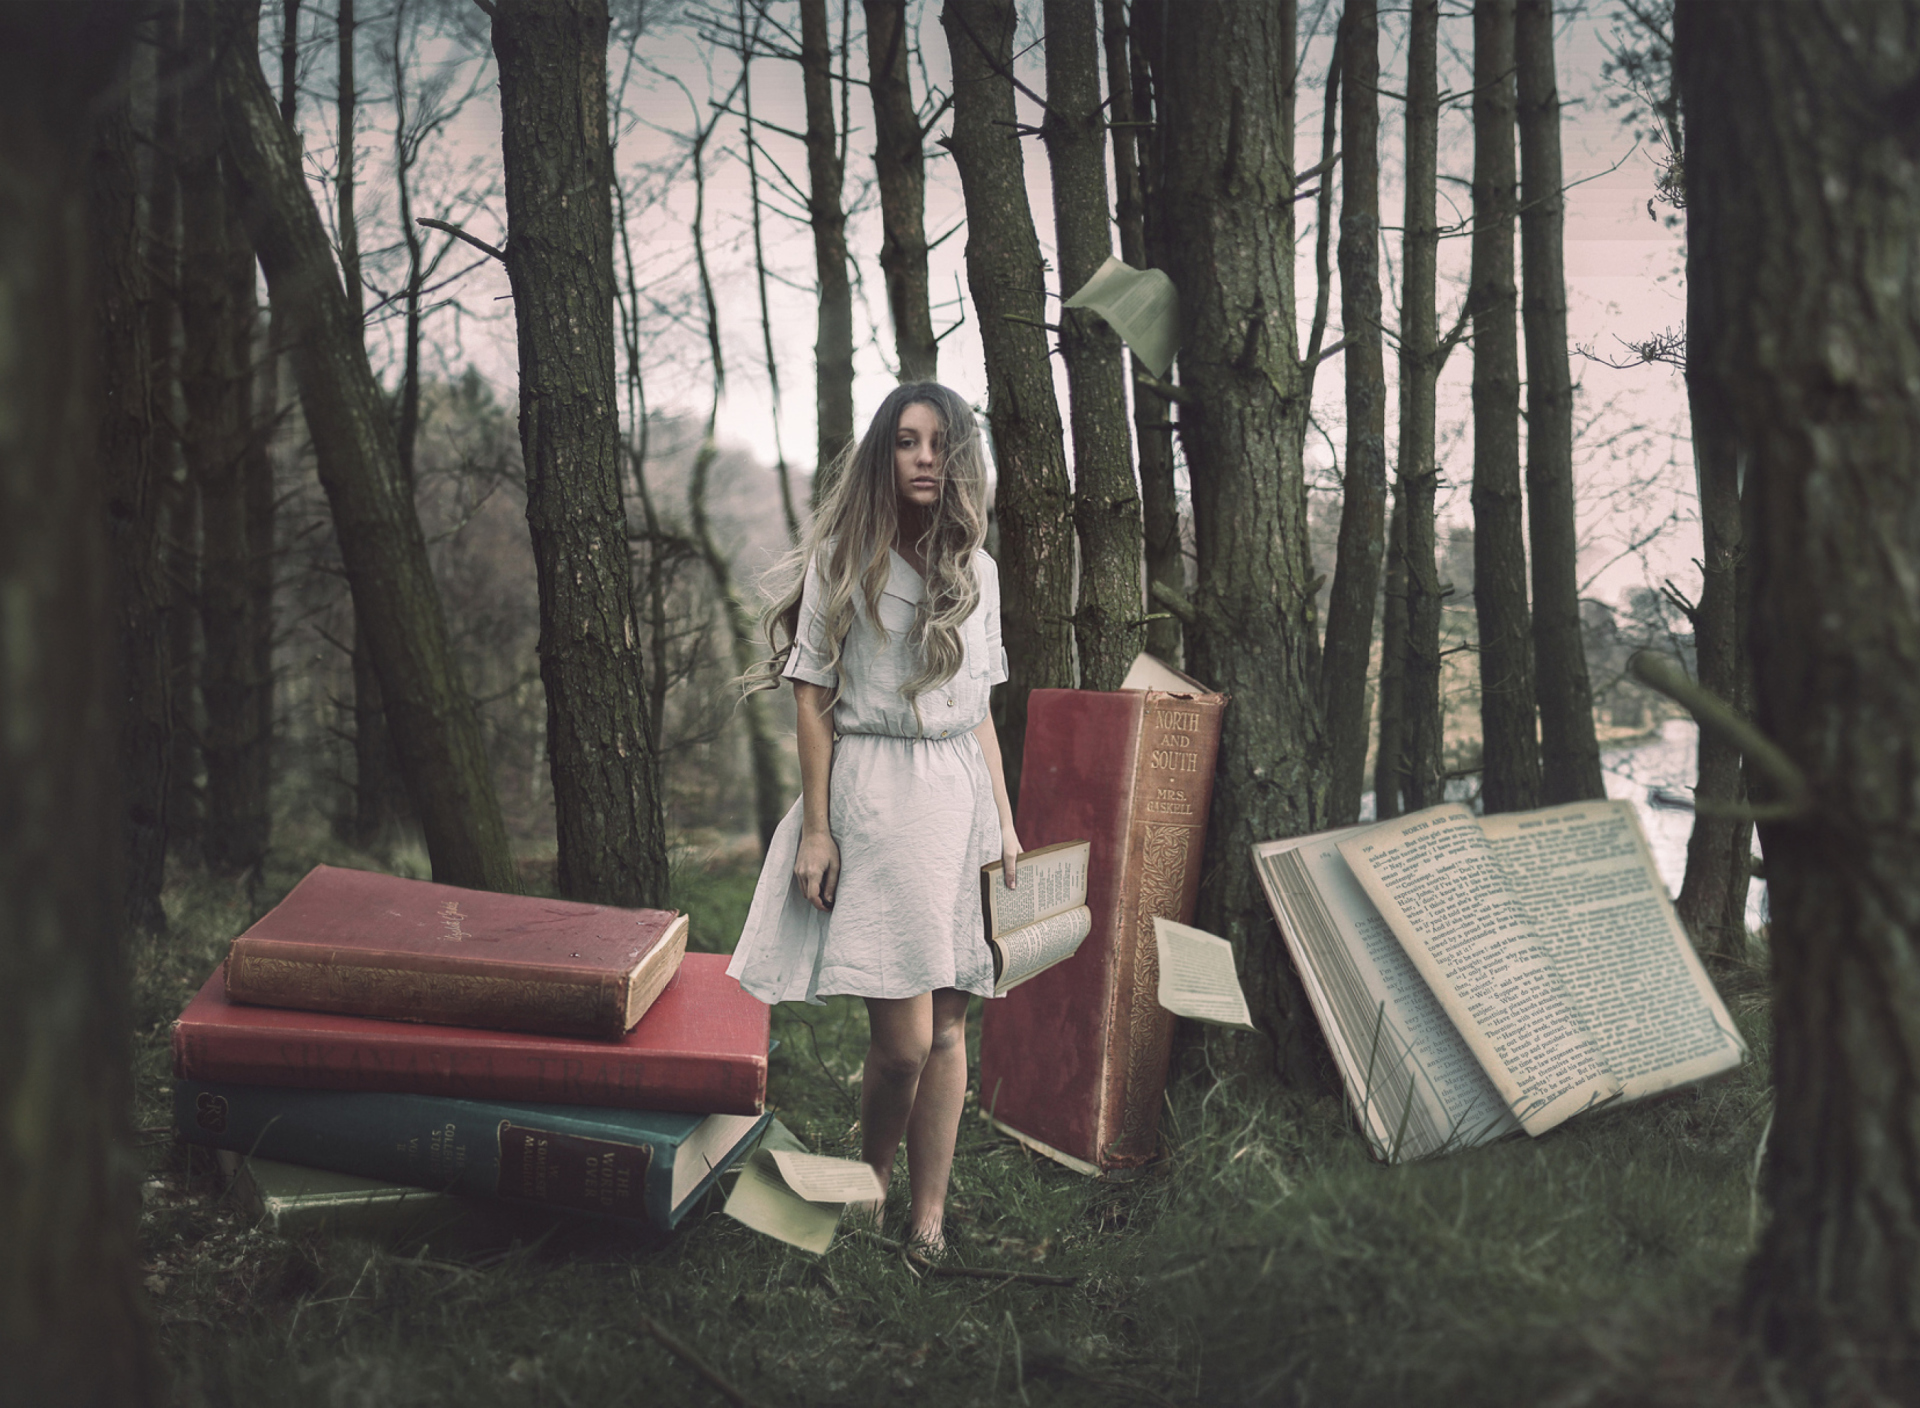 Das Forest Nymph Surrounded By Books Wallpaper 1920x1408